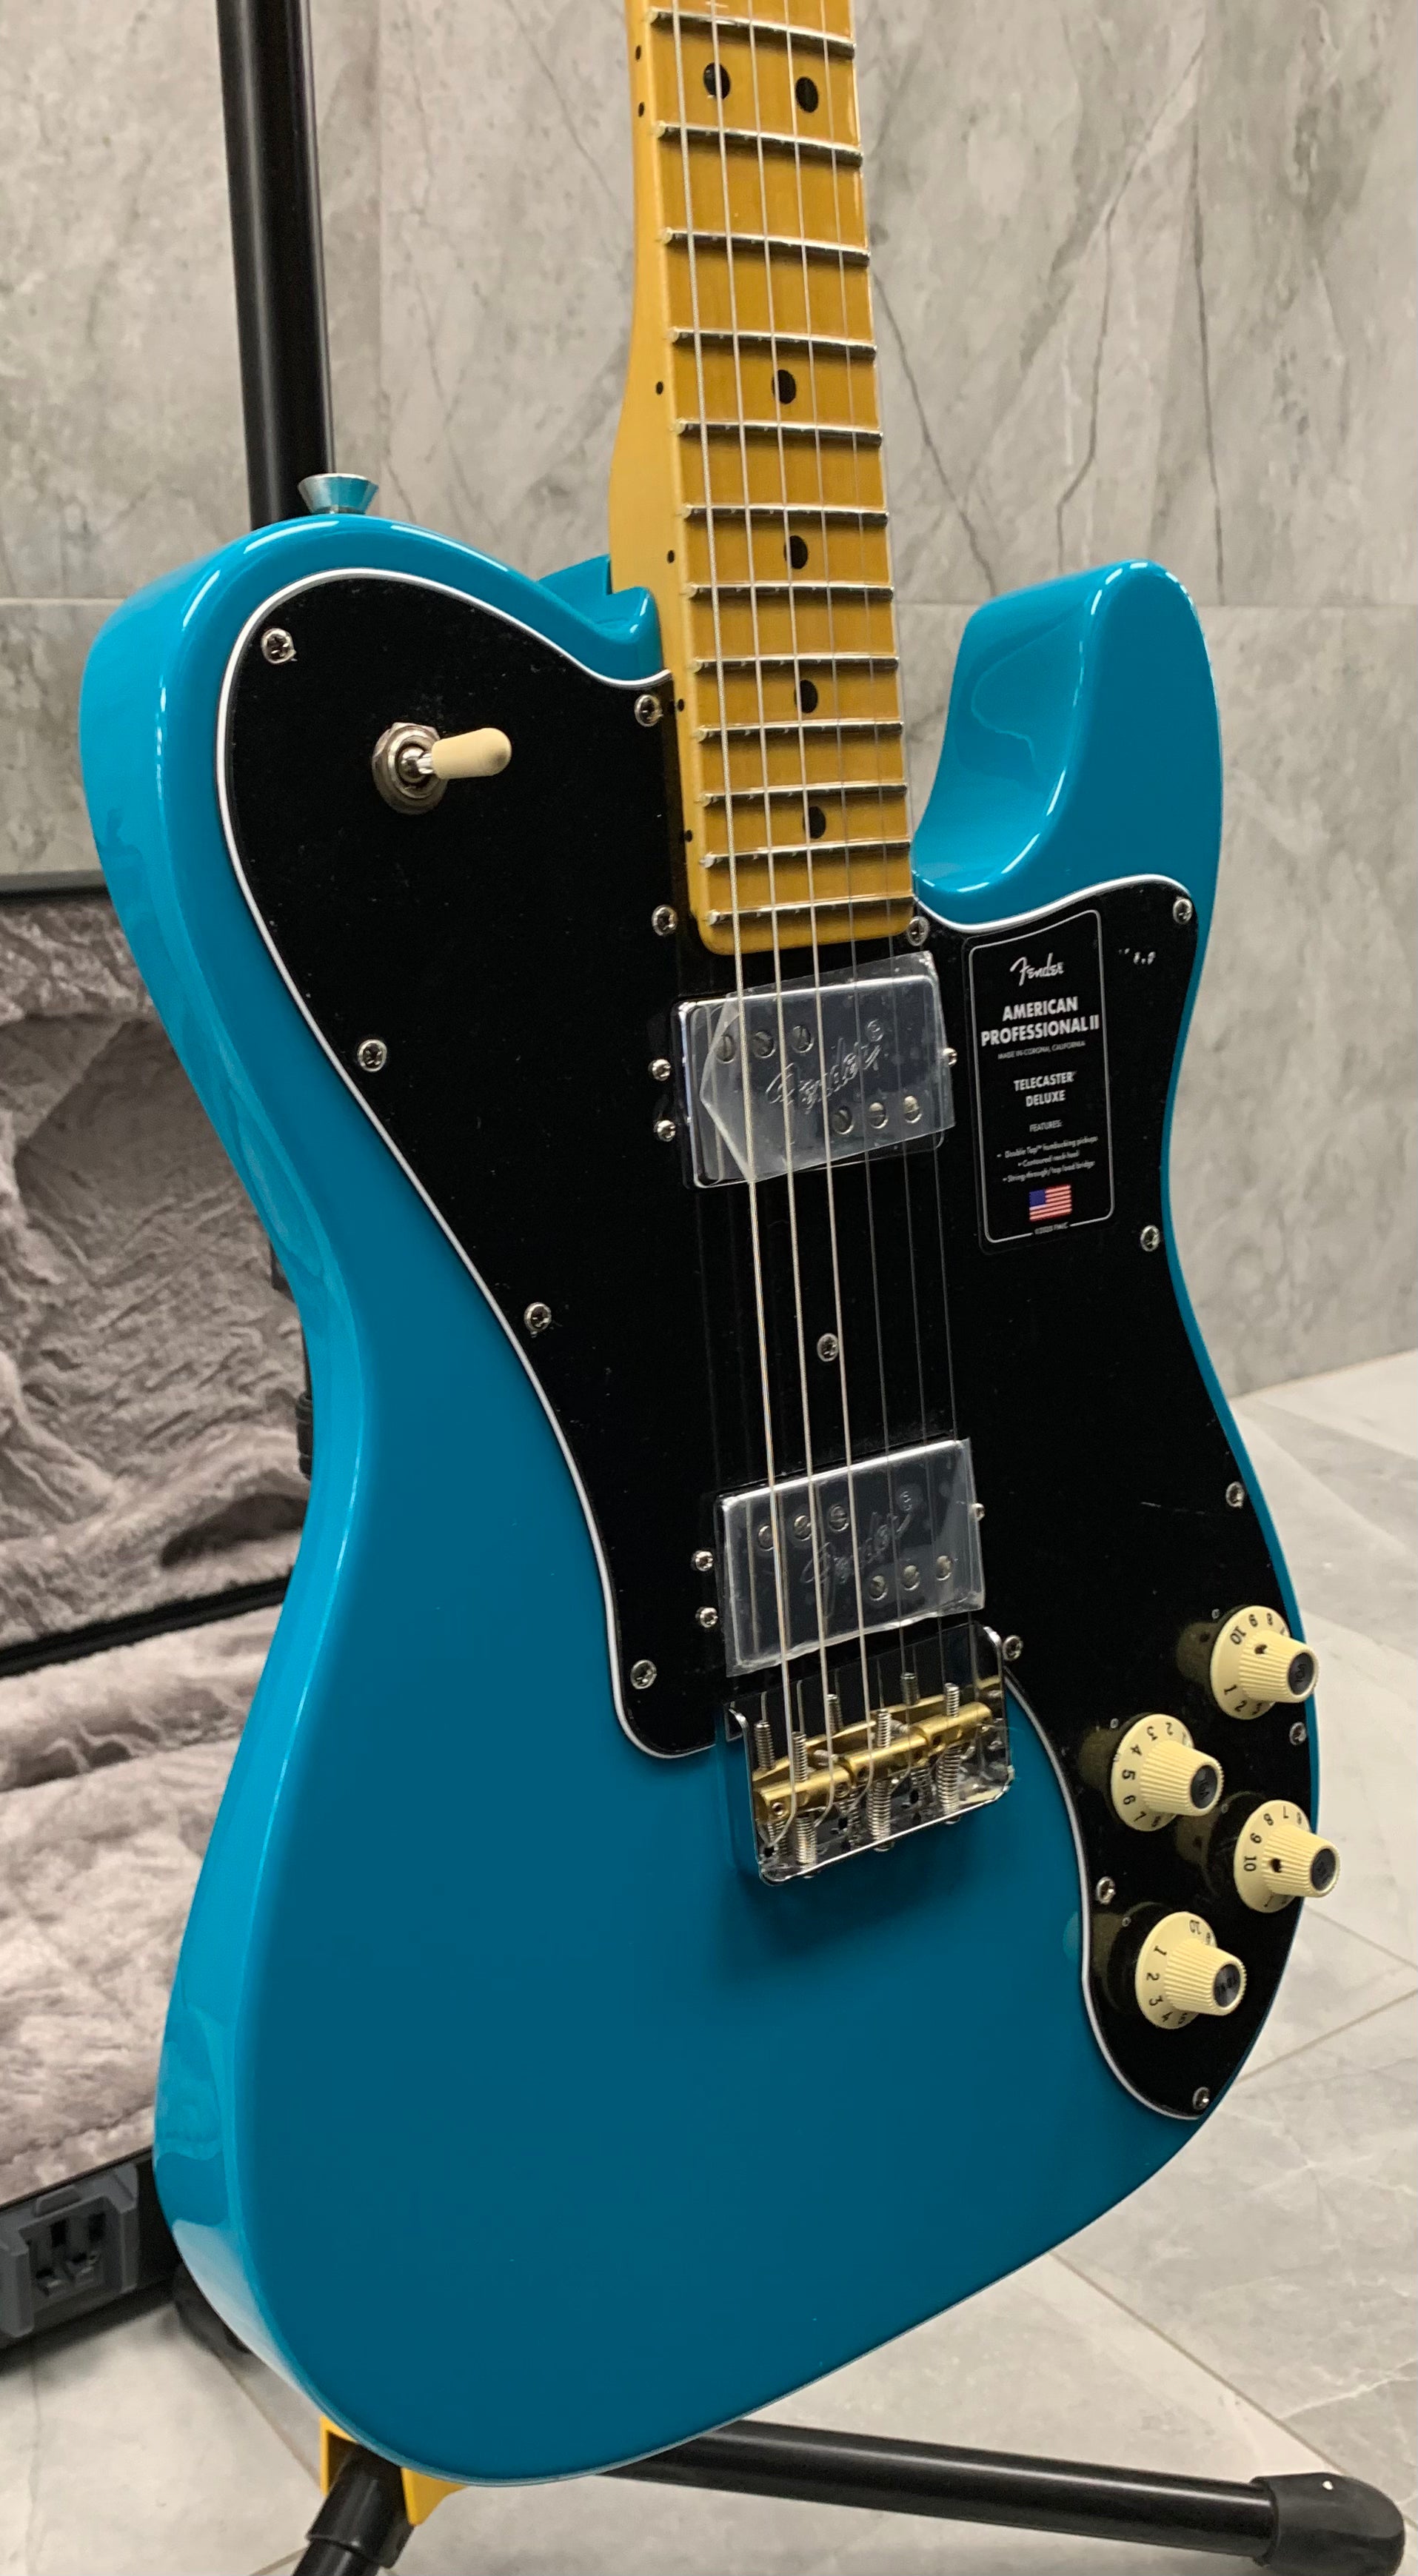 Fender American Professional II Telecaster Deluxe Maple Fingerboard Miami Blue F-0113962719 SERIAL NUMBER US22043942 - 8.0 LBS